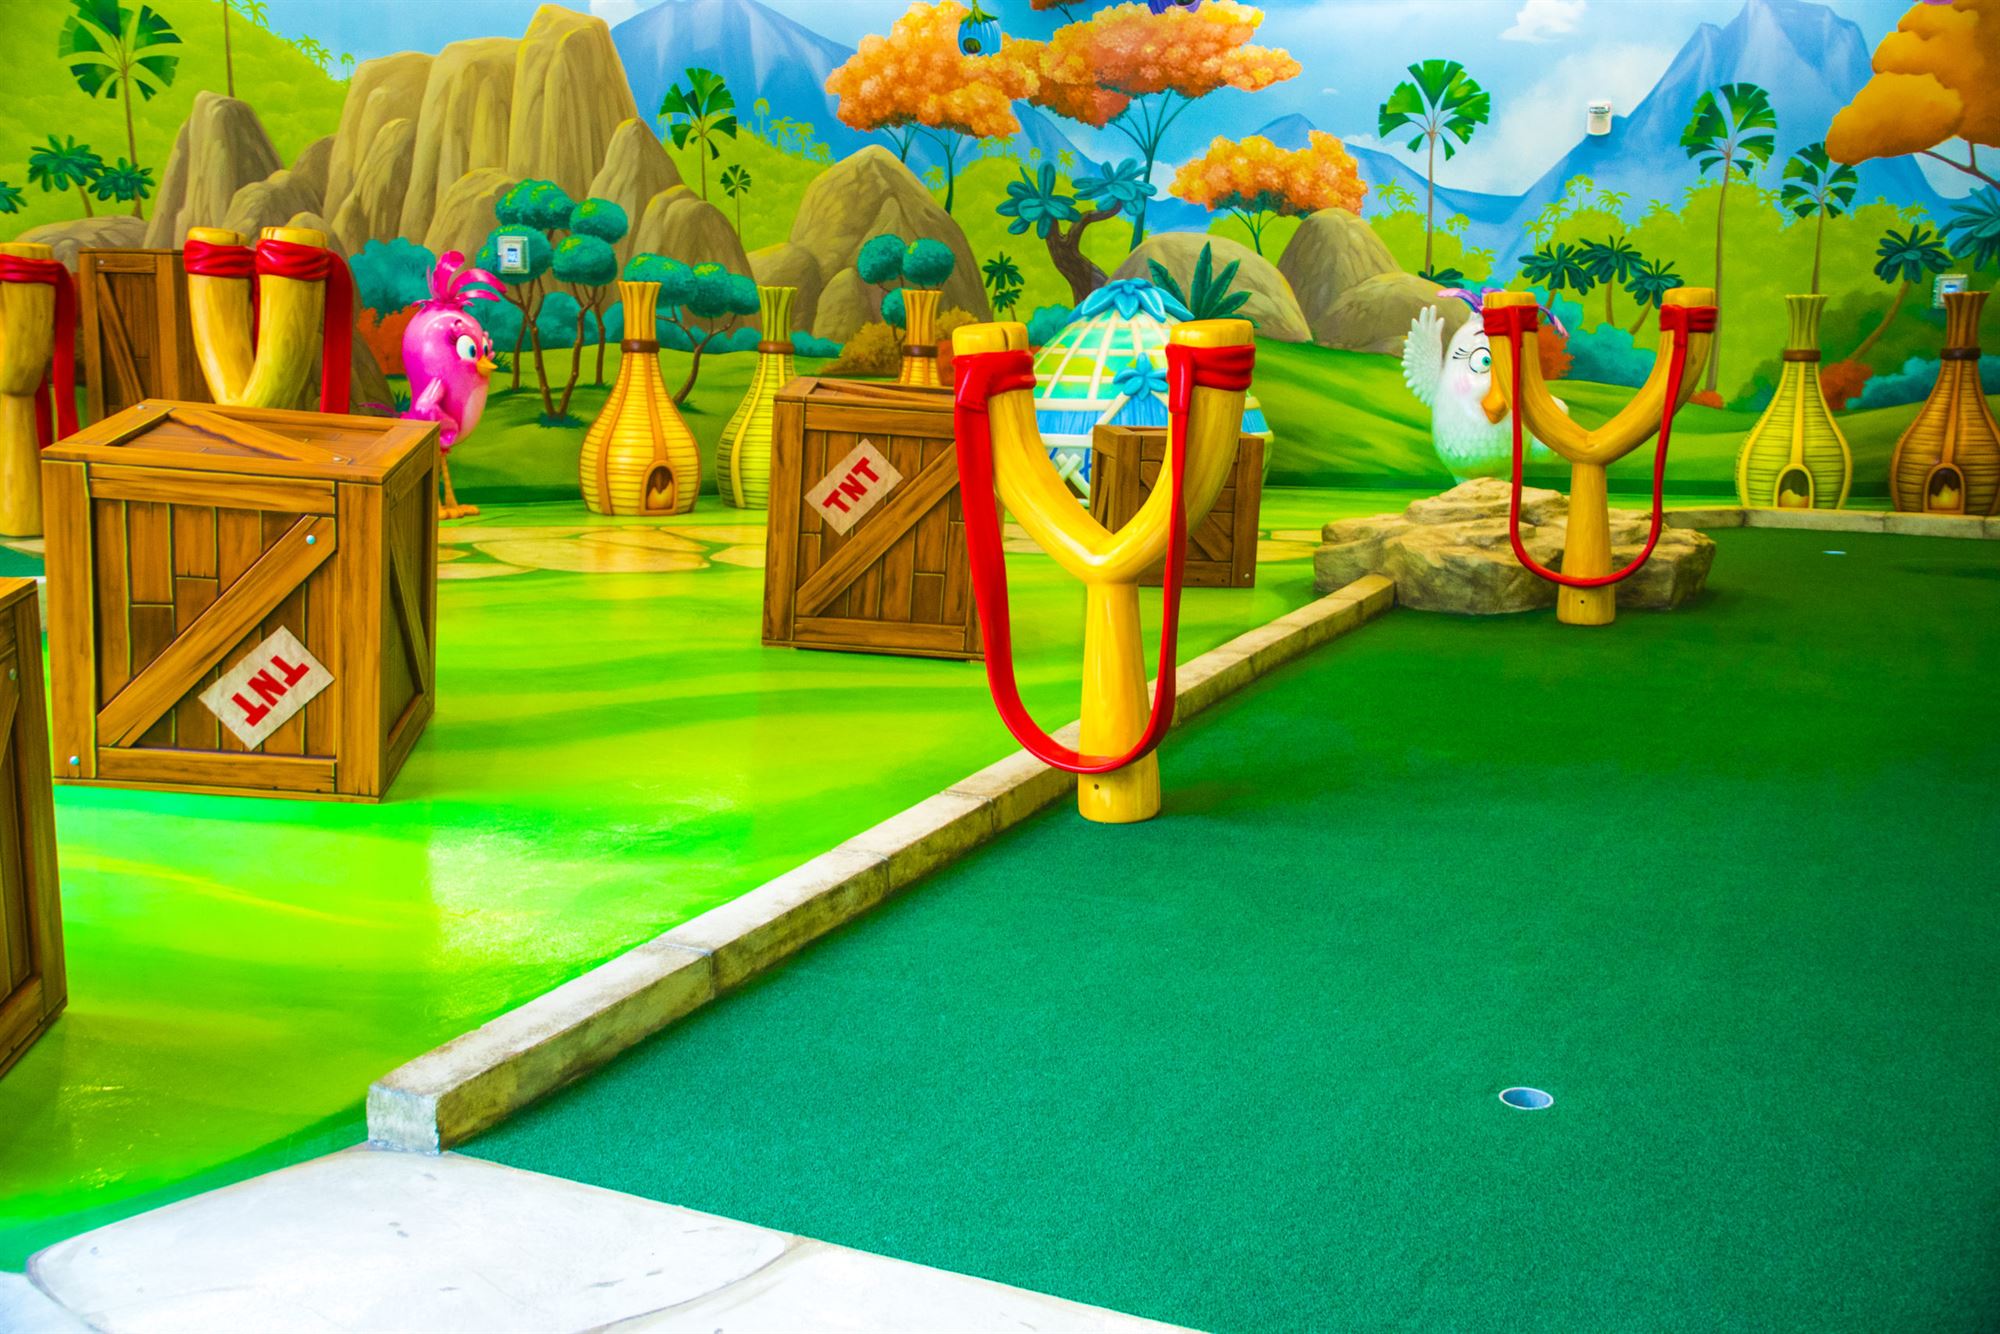 Mini Indoor Golf, Bringing a little bit of the outdoors in!